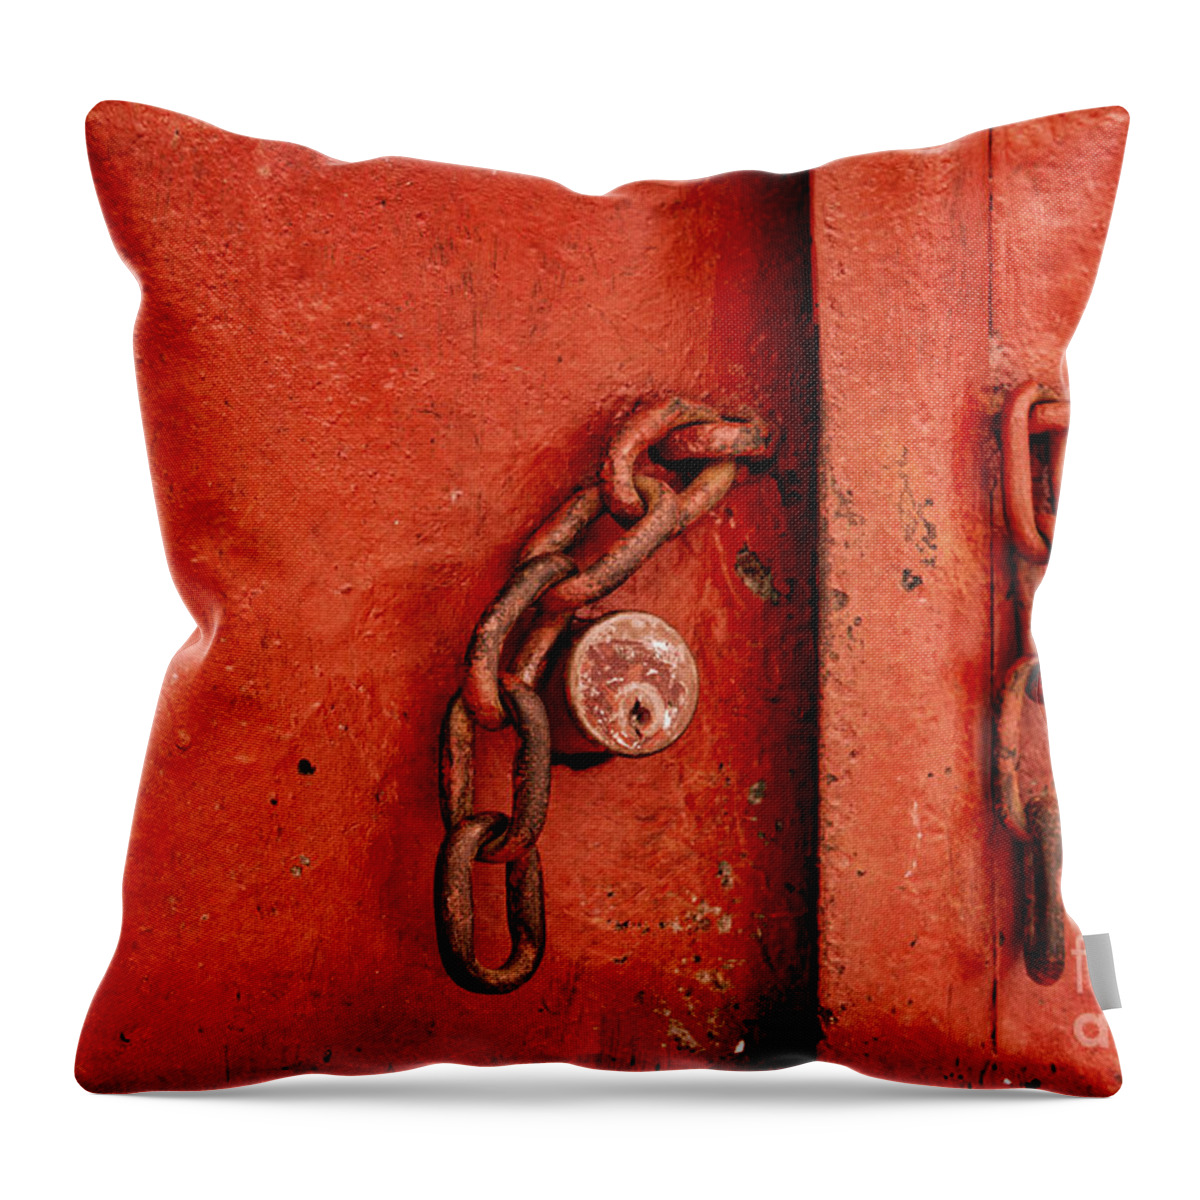 Red Door Throw Pillow featuring the photograph Unlocked by Ana V Ramirez